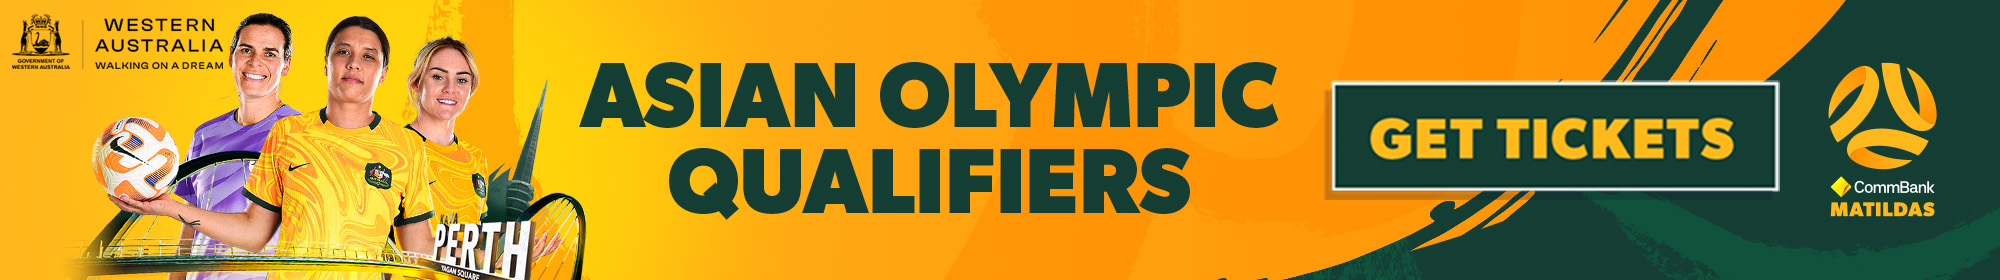 Olympic Qualifiers Buy Now